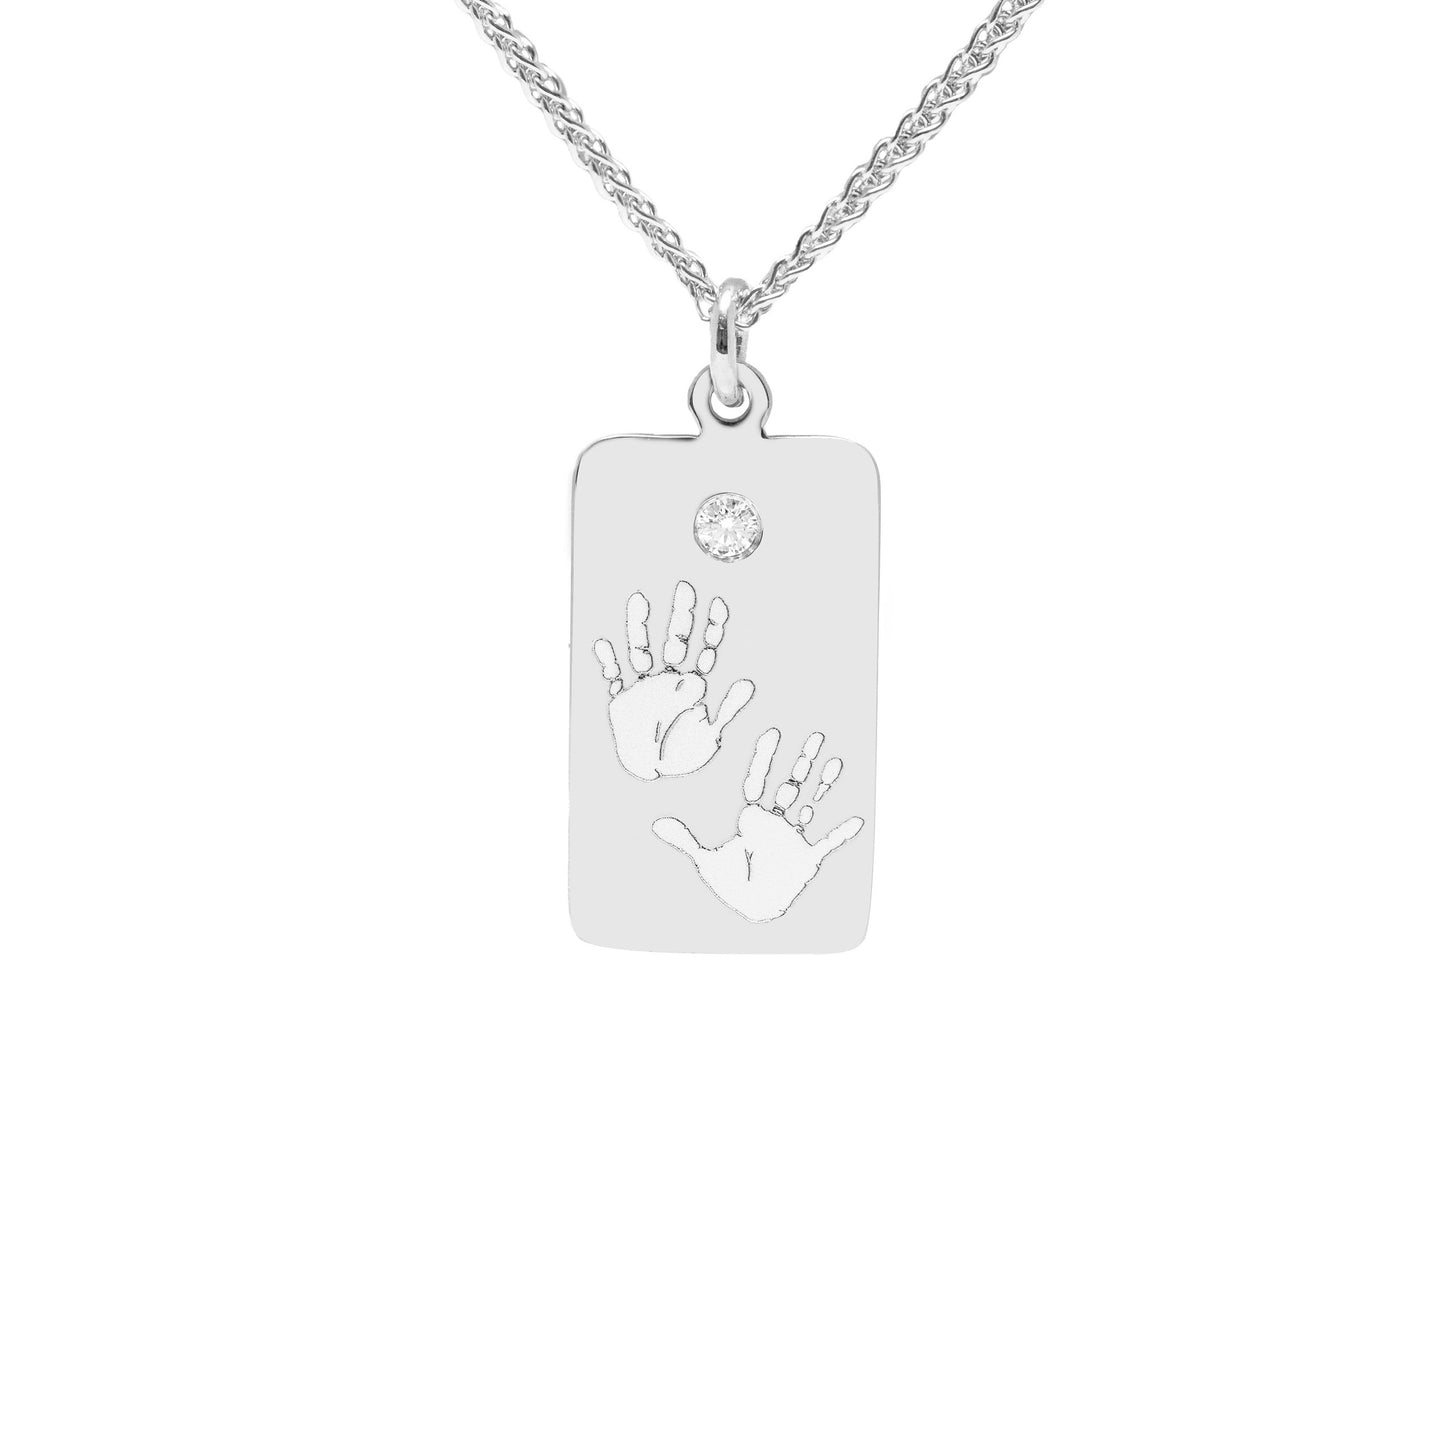 Baby Handprint / Footprint Wheat Chain Tag Necklace with a Diamond